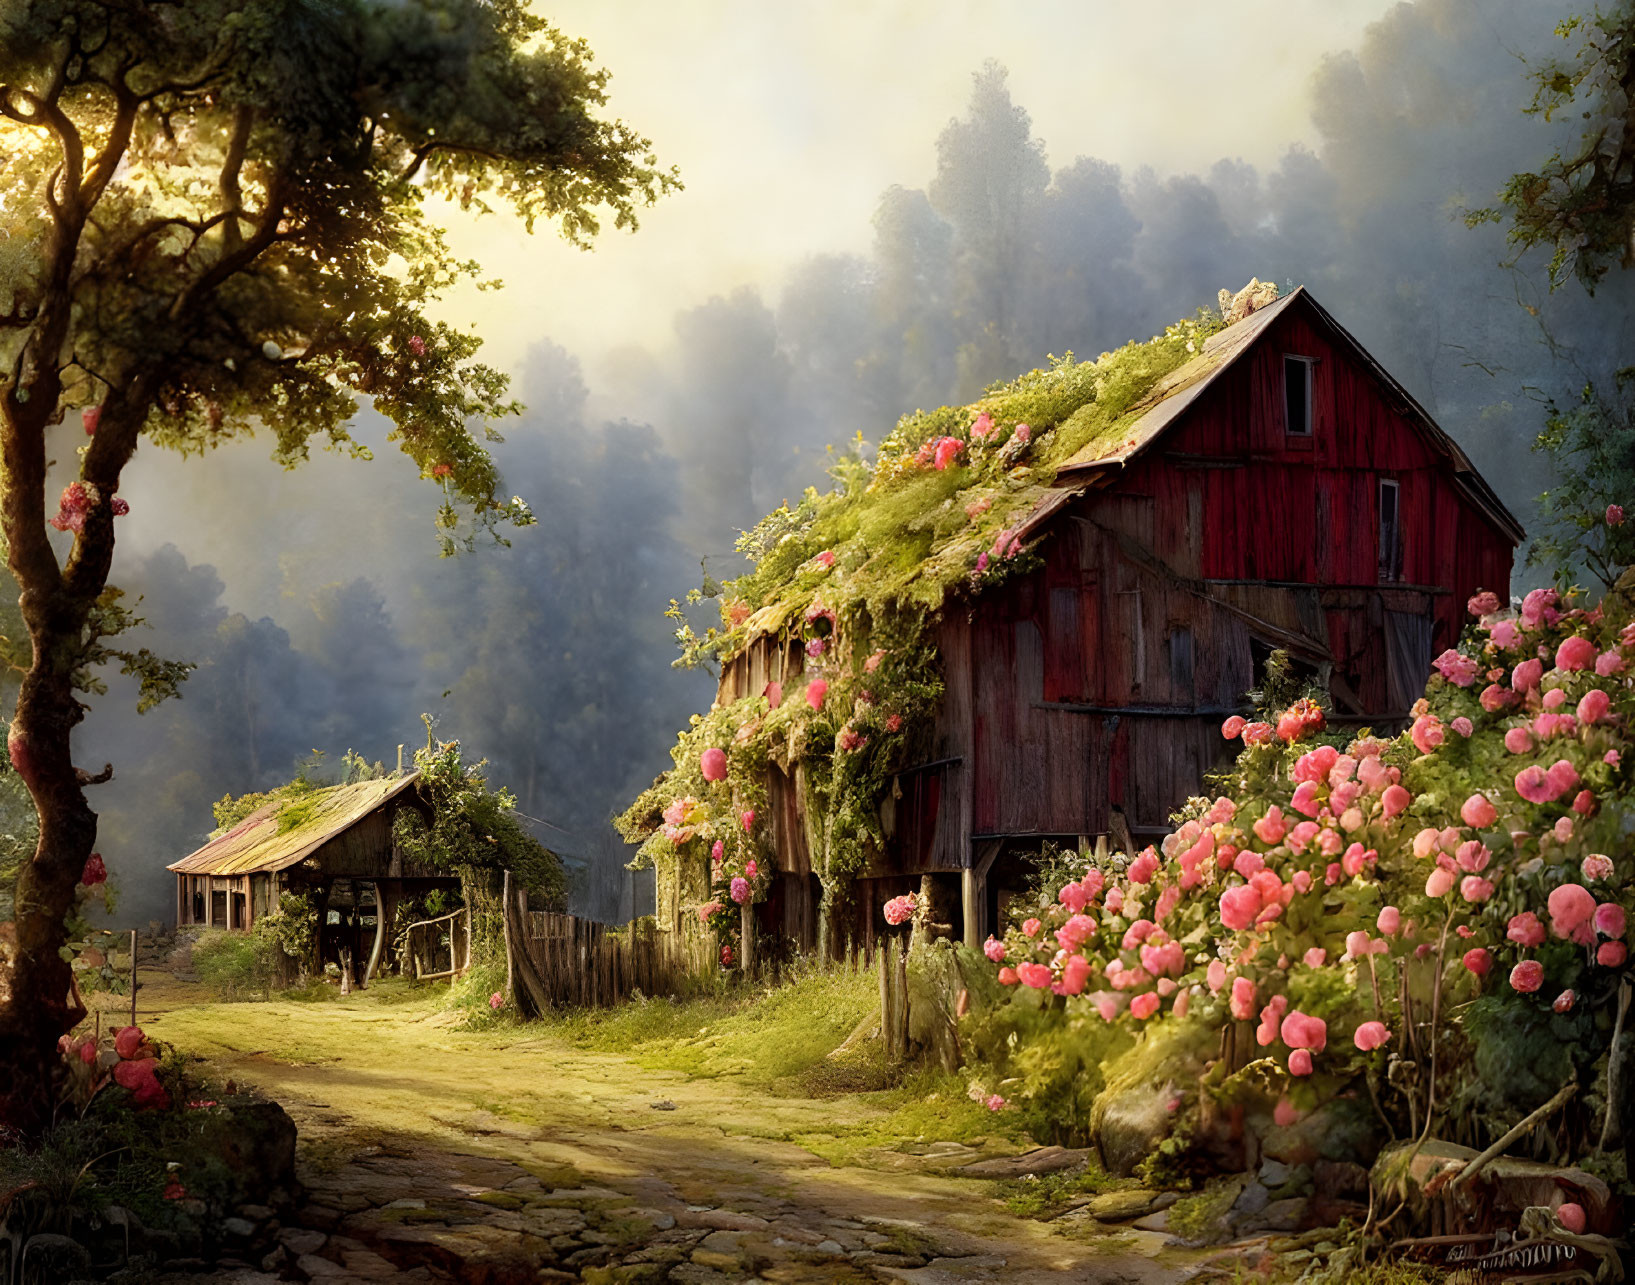 Rural landscape with sun-dappled path, flower-covered barn, and quaint wooden shack